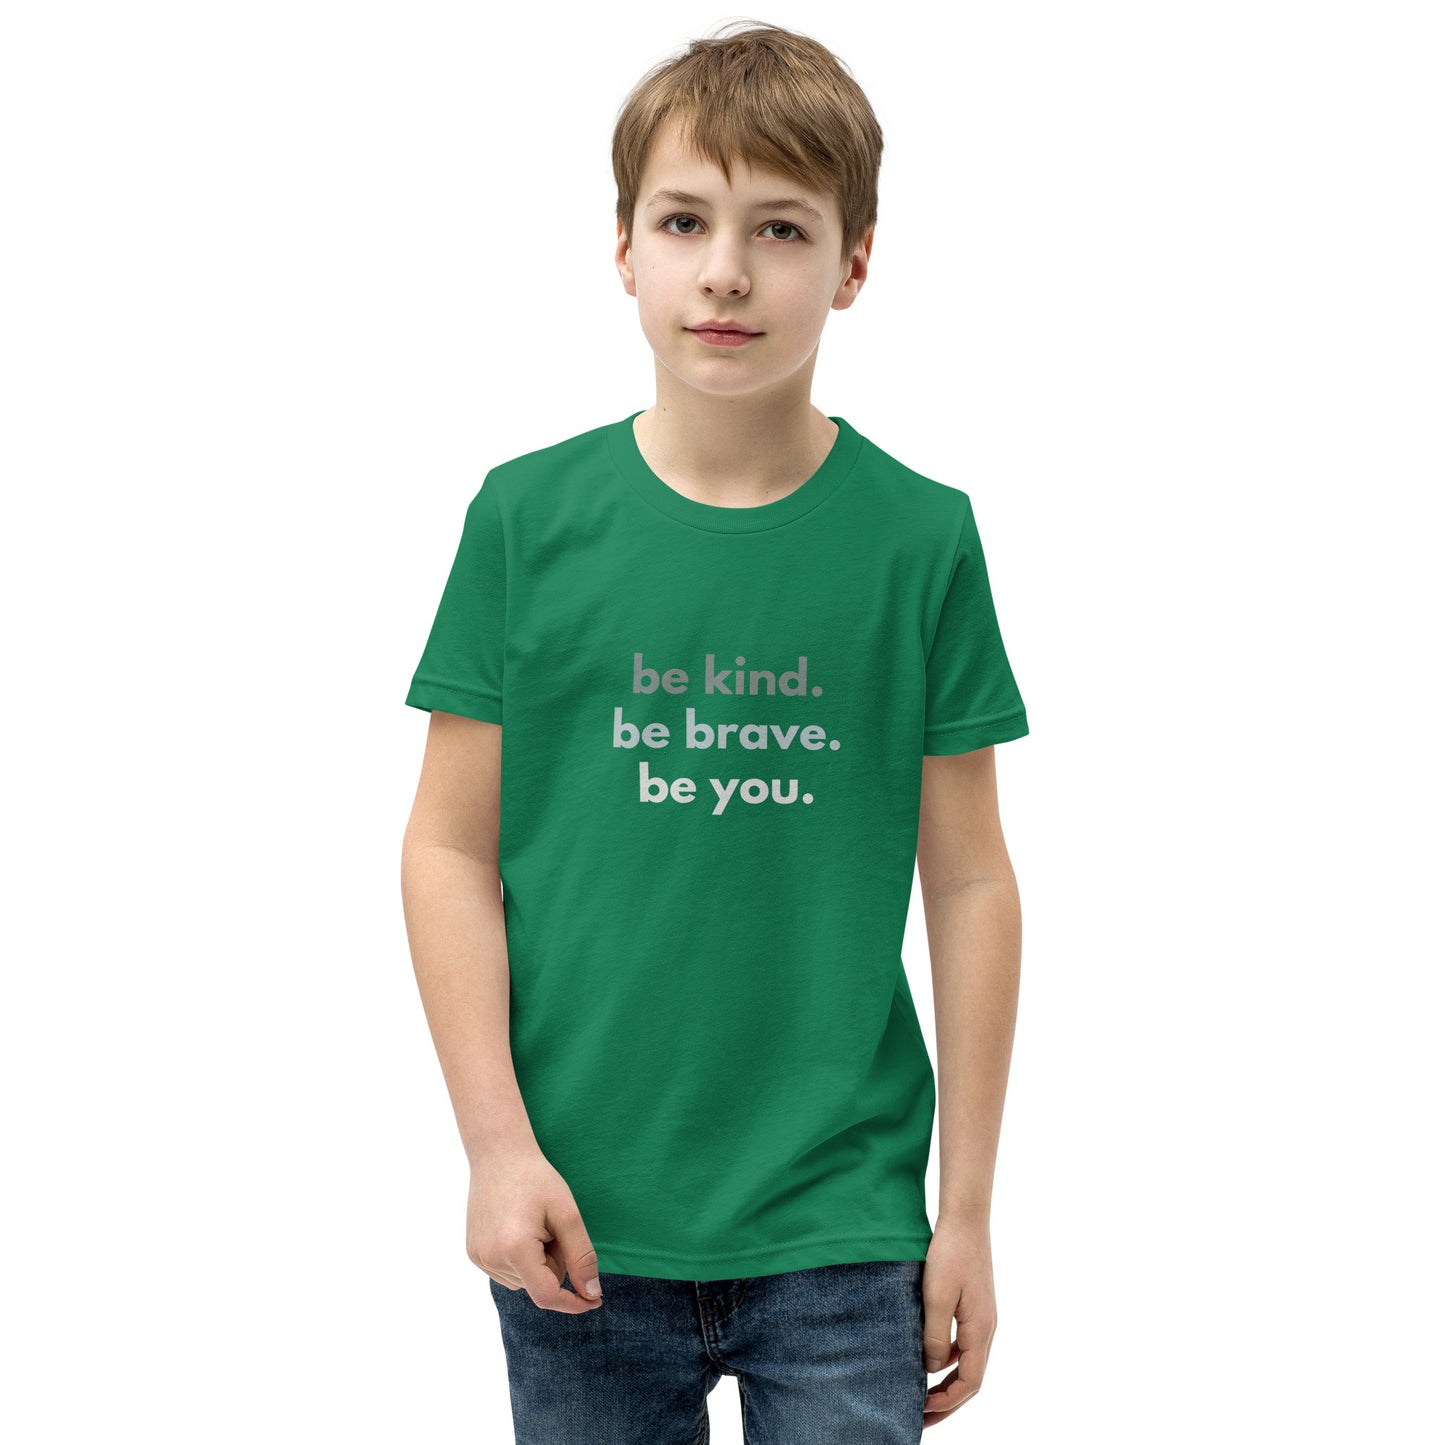 Youth Short Sleeve T-Shirt - Be kind. Be brave. Be you.